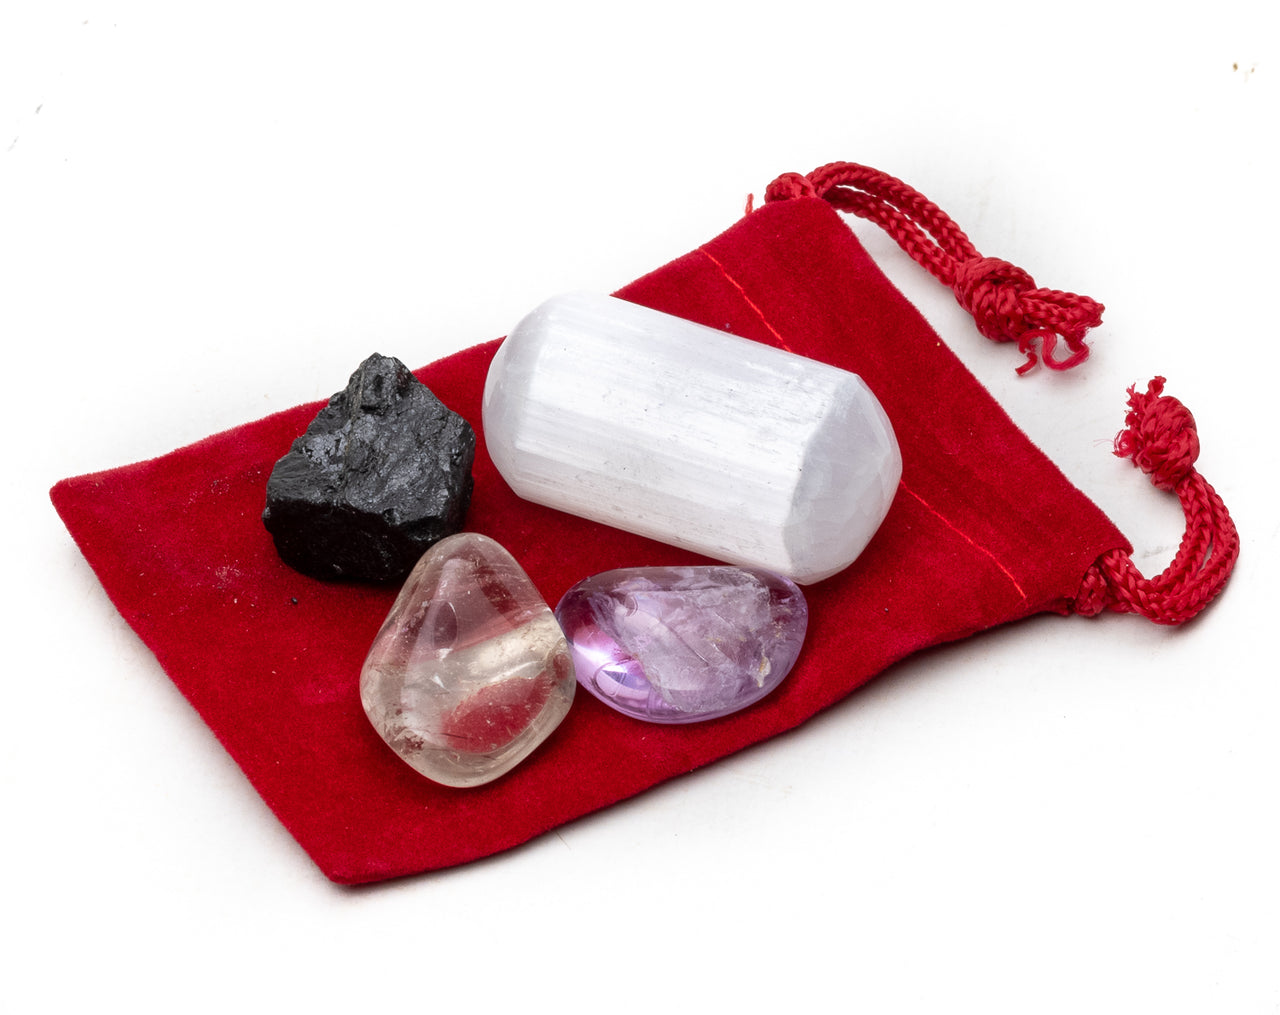 Home Protection Crystals Kit with Selenite, Black Tourmaline, Smoky Quartz, and Amethyst - Buy 1, Get 1 FREE